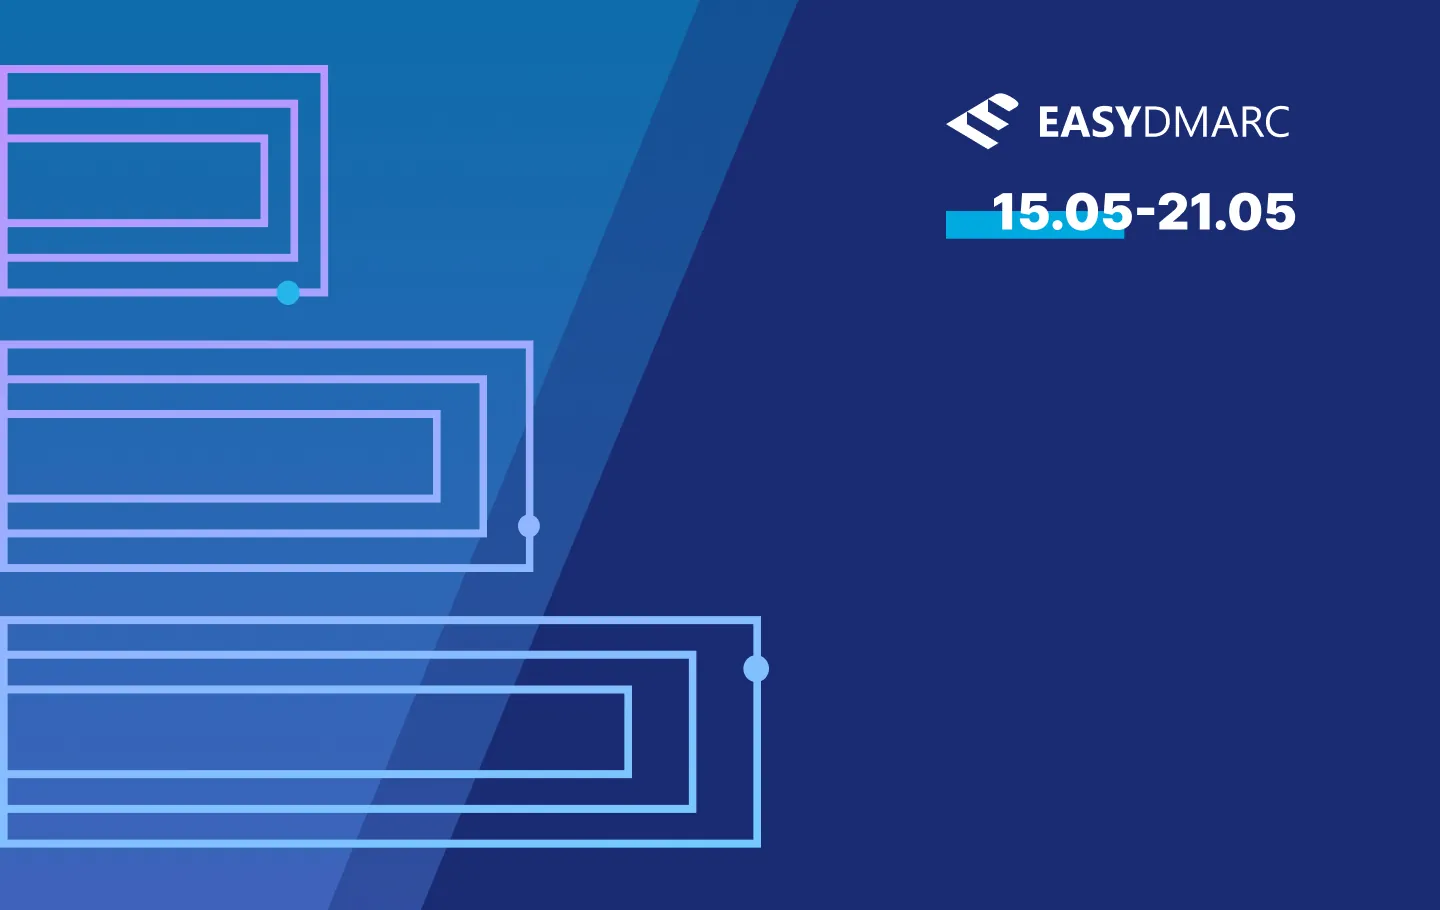 EasyDMARC logo and a date on a blue background